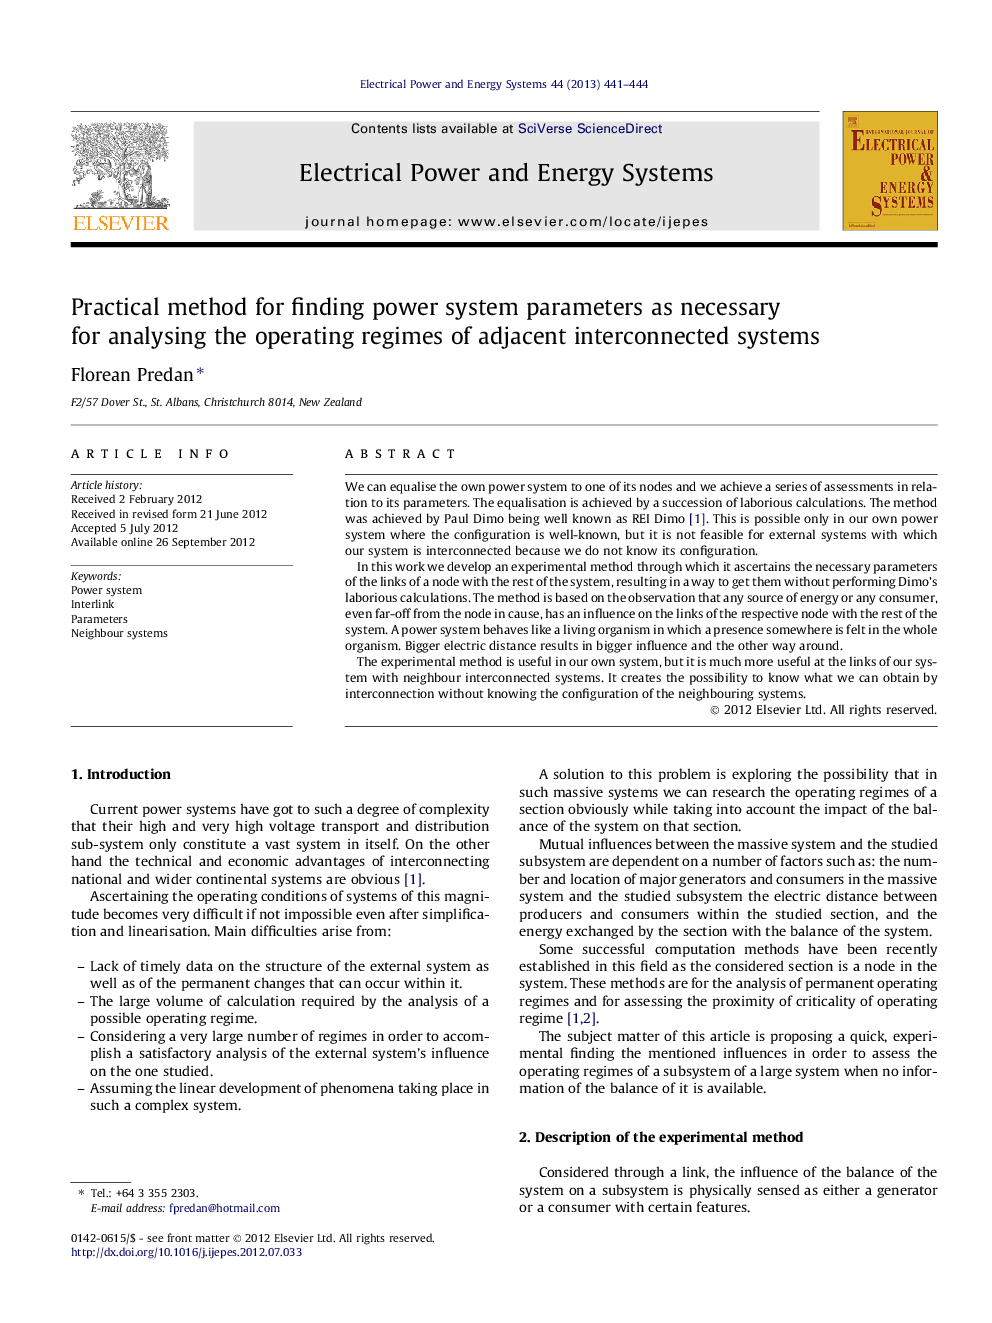 Practical method for finding power system parameters as necessary for analysing the operating regimes of adjacent interconnected systems